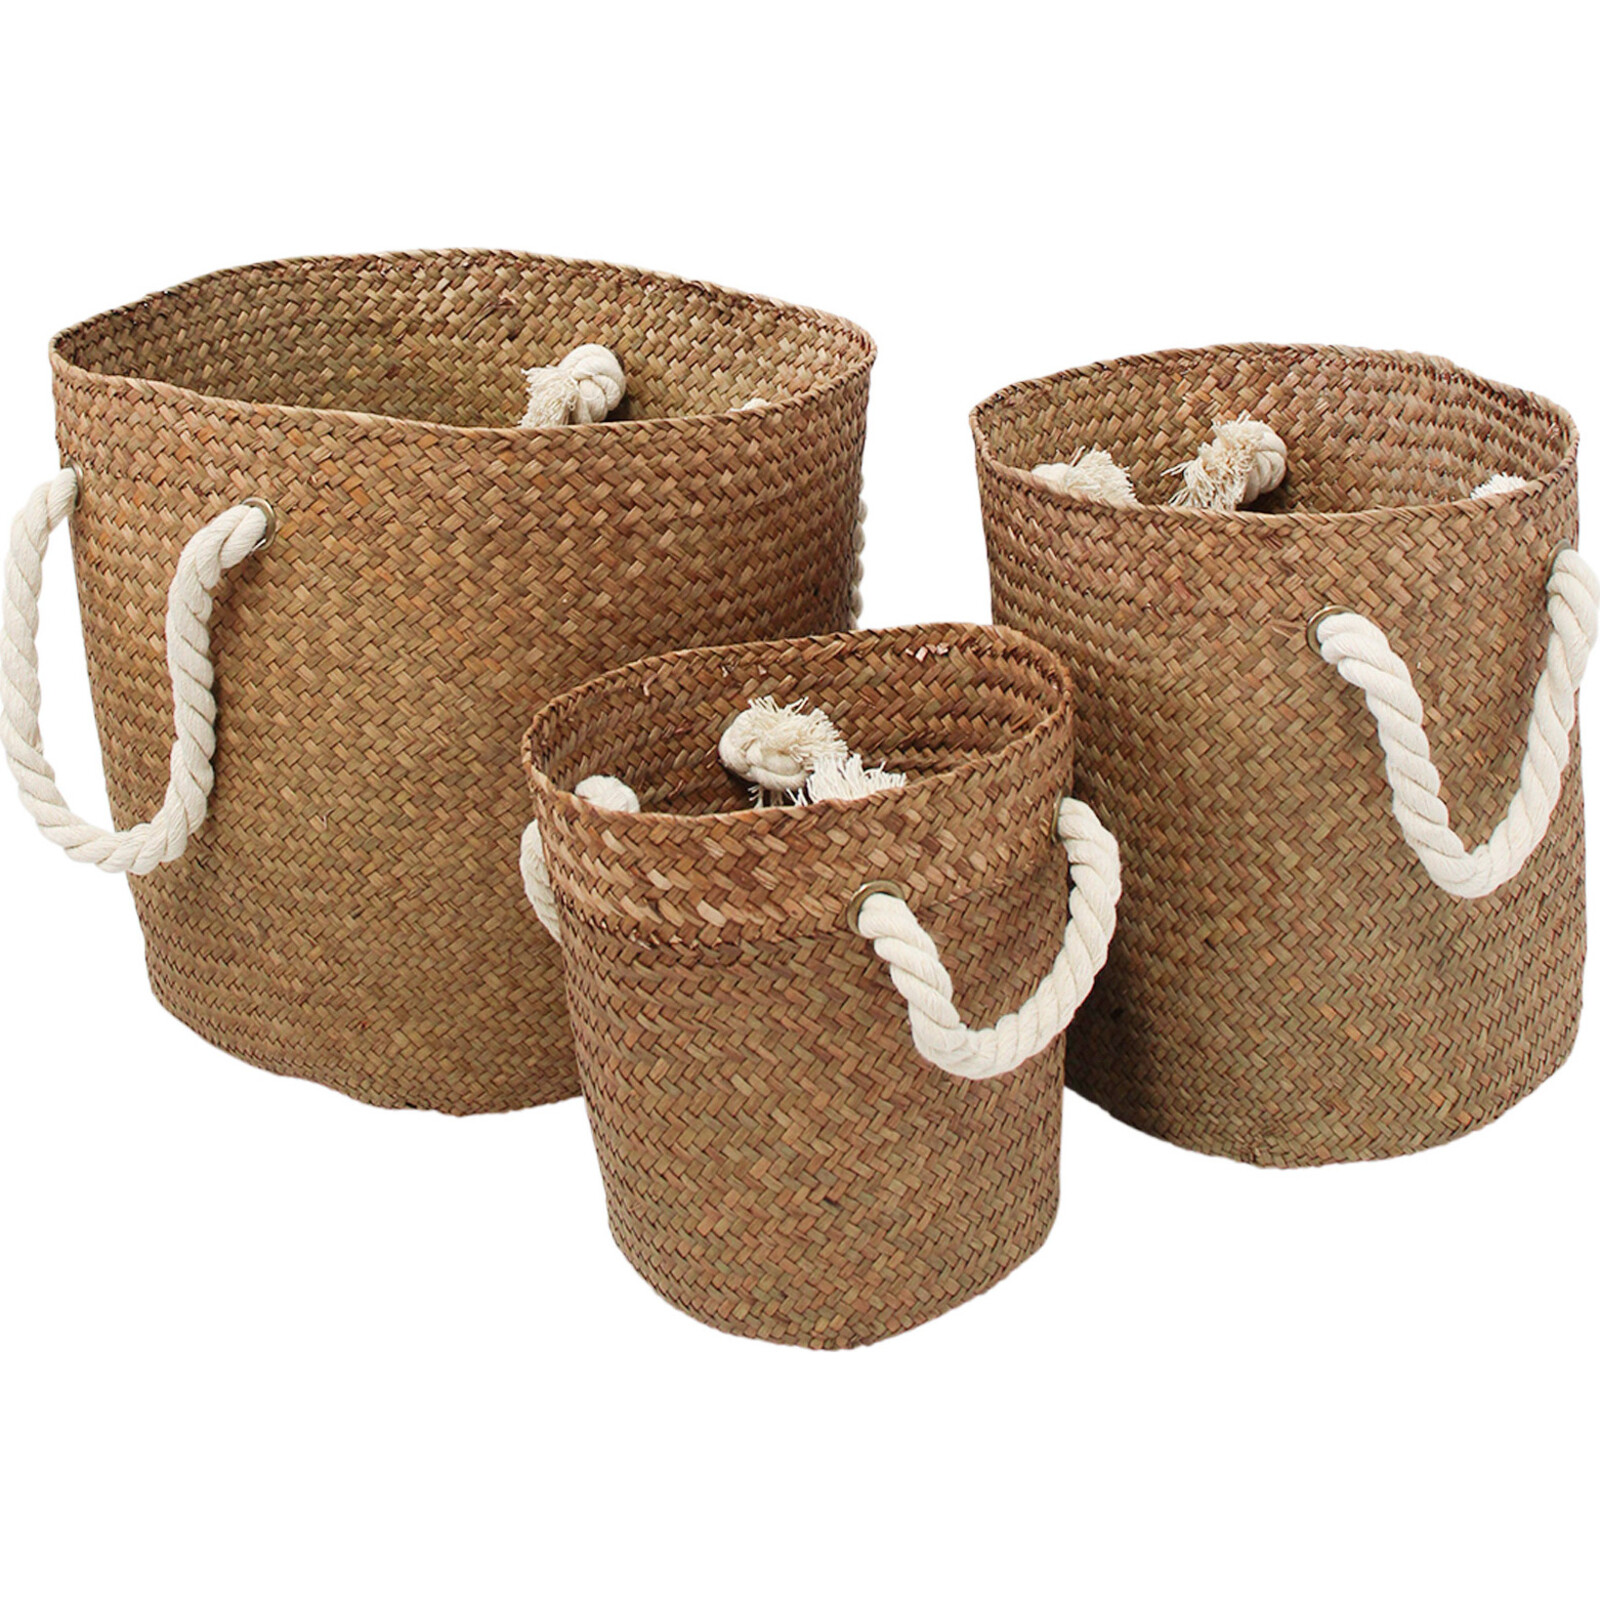 Woven Baskets S/3 Rope Handle